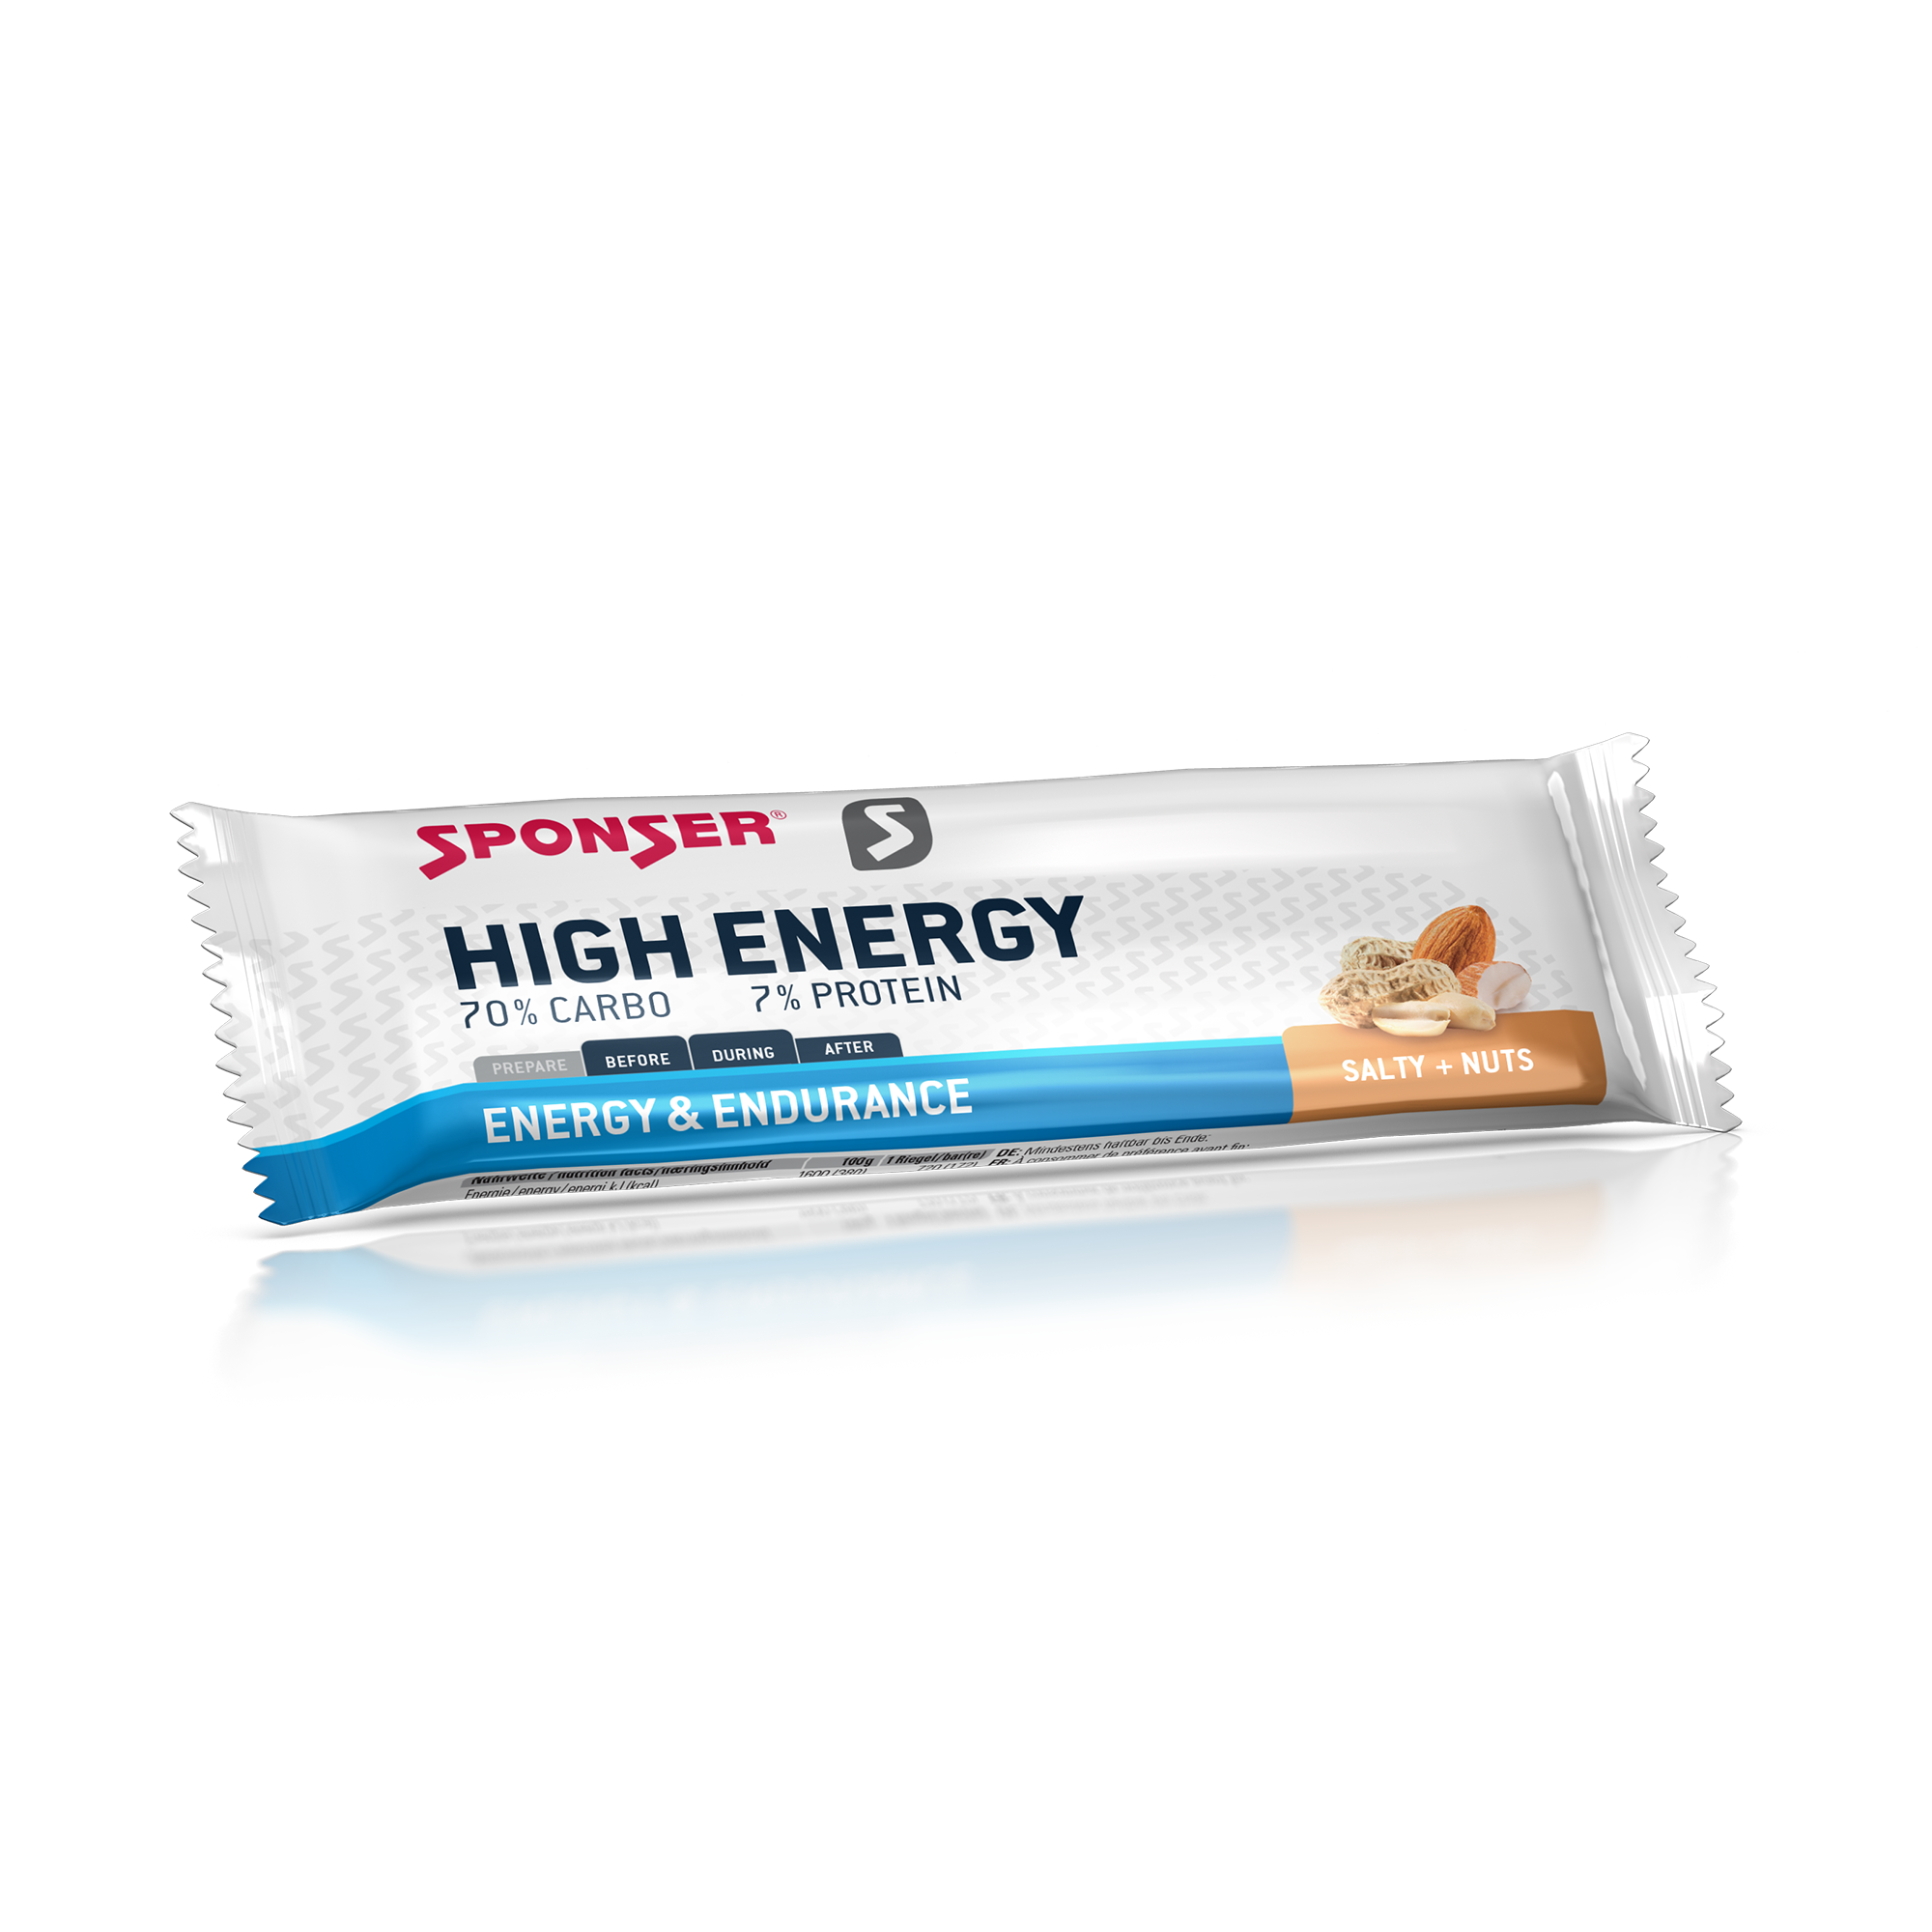 High Energy Salty + Nuts 70% Carbo 7% protein